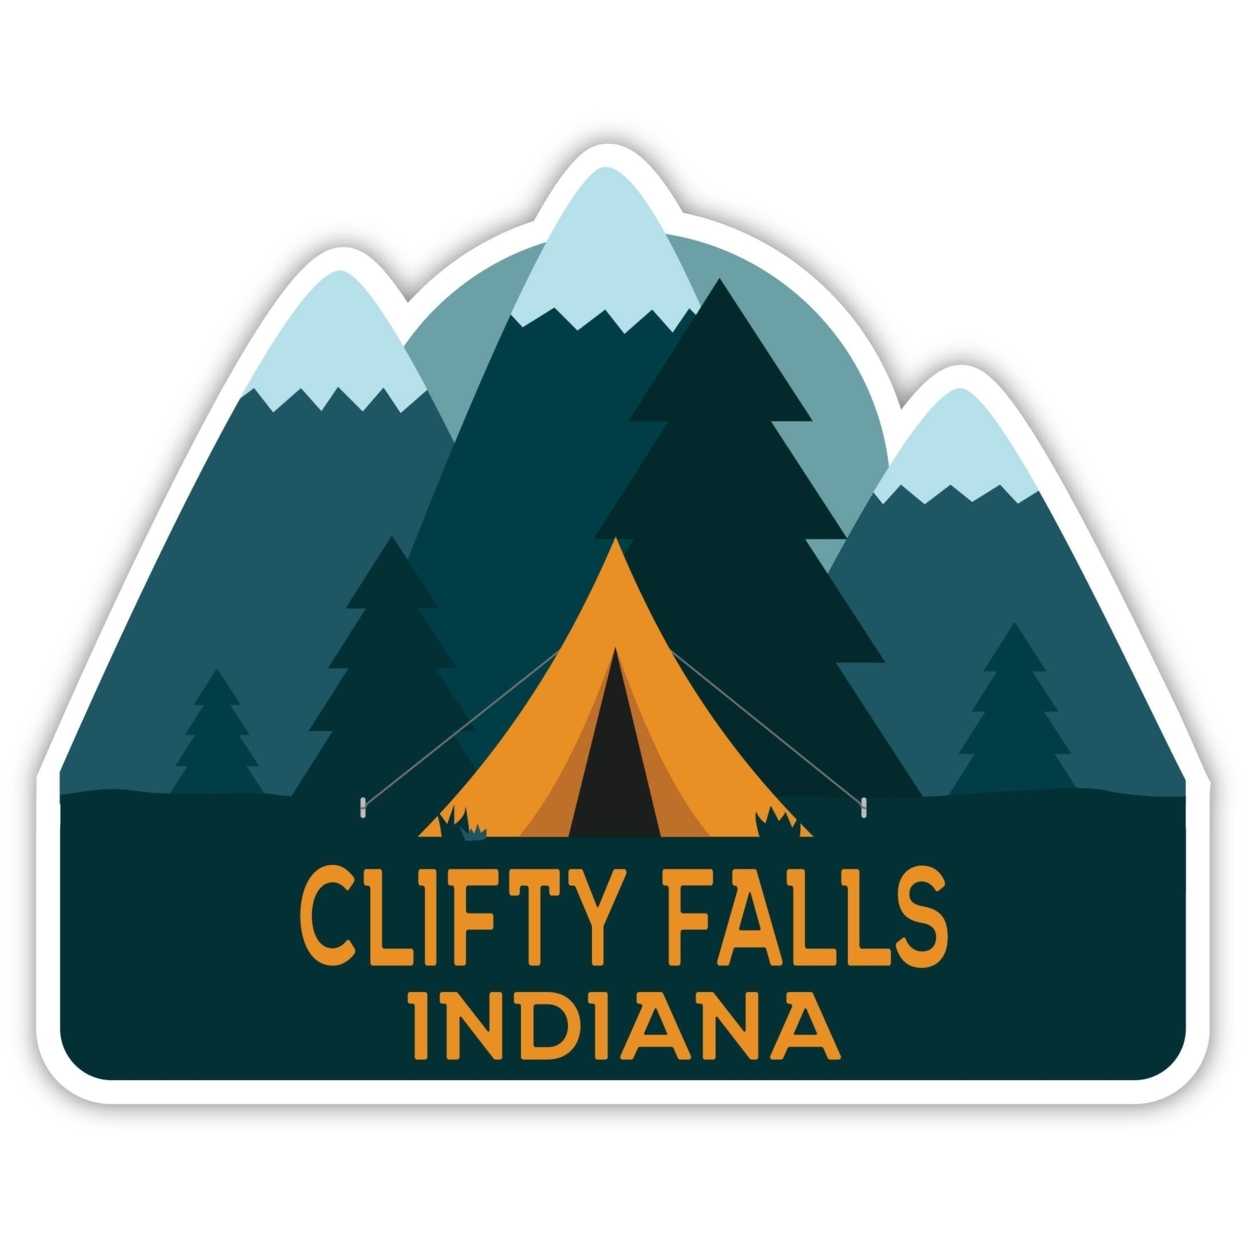 Clifty Falls Indiana Souvenir Decorative Stickers (Choose Theme And Size) - 4-Pack, 4-Inch, Tent